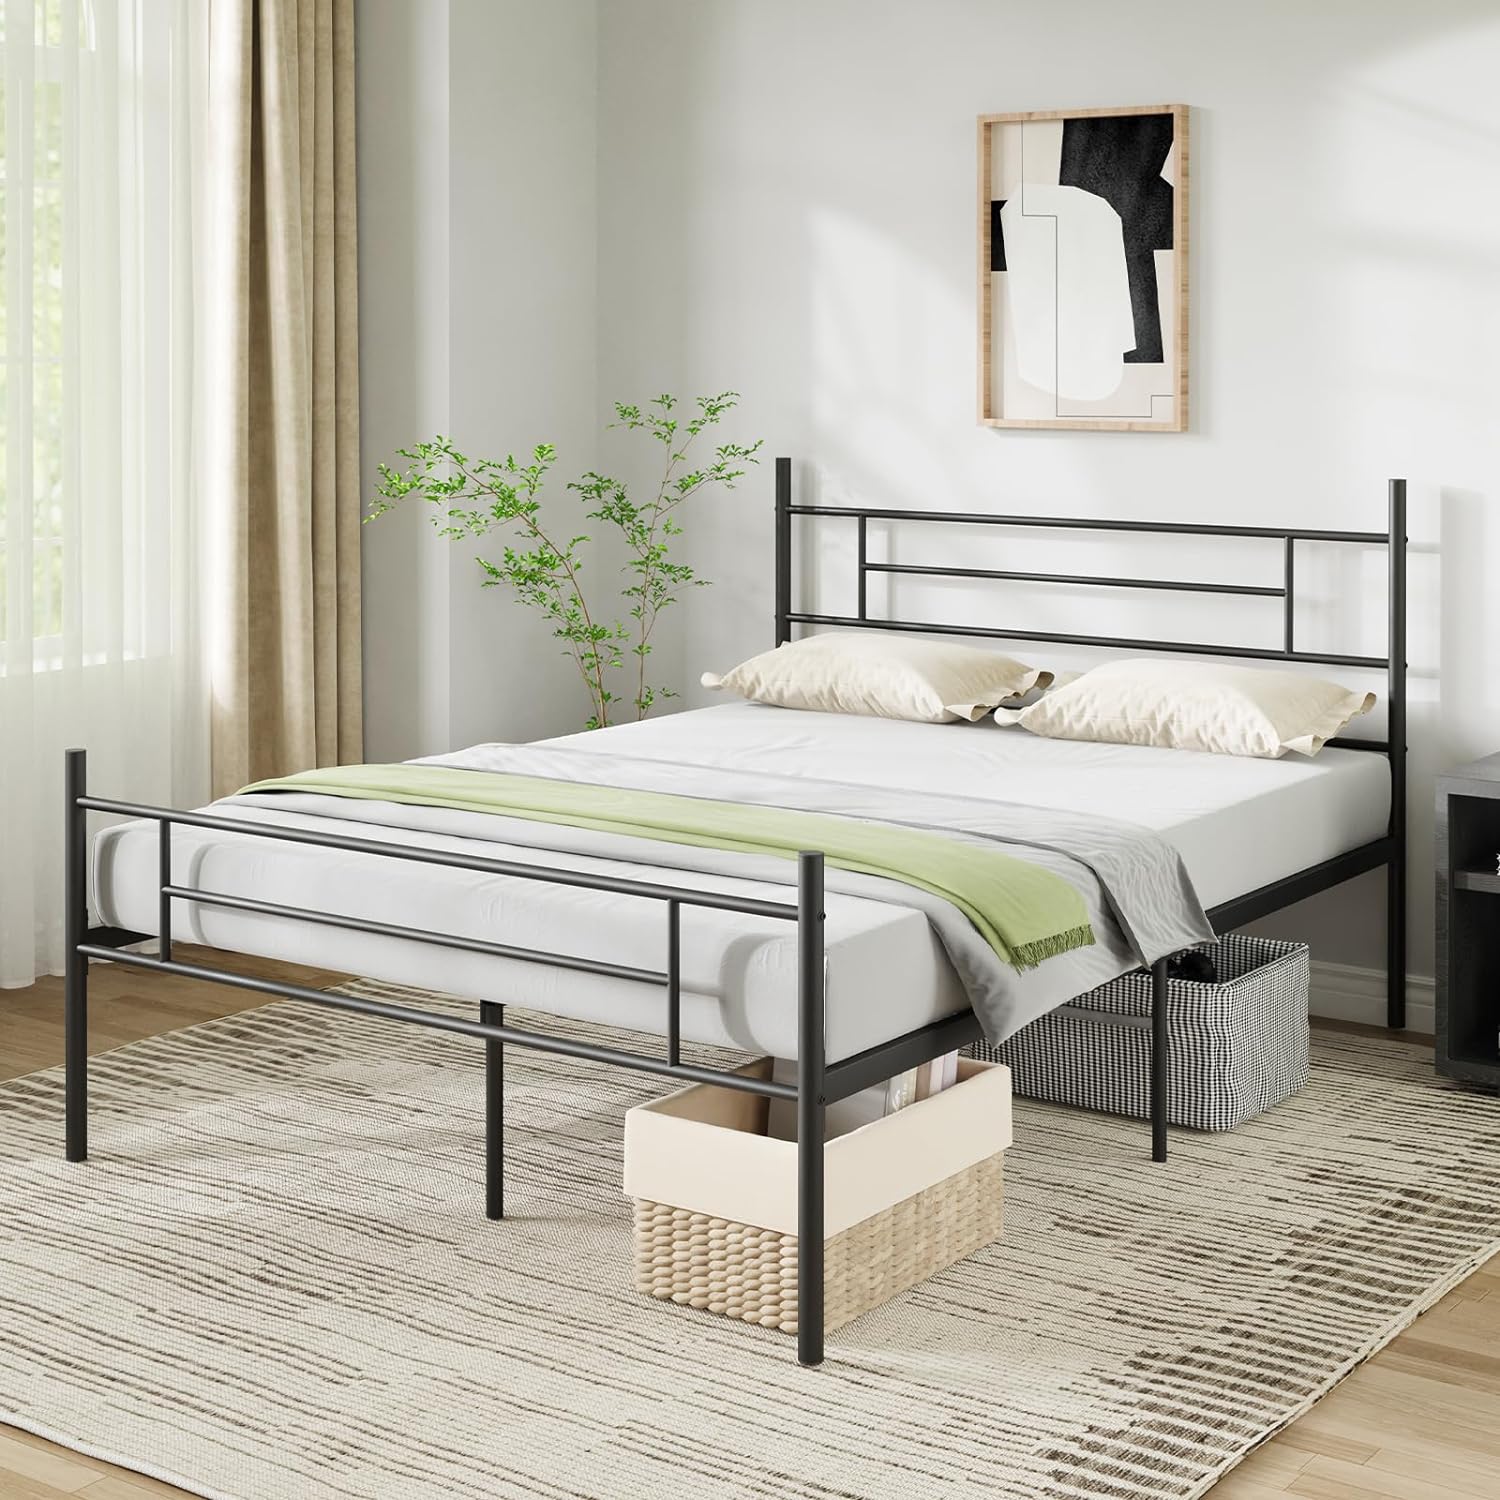 Wrought Metal Sleigh Bed Frame